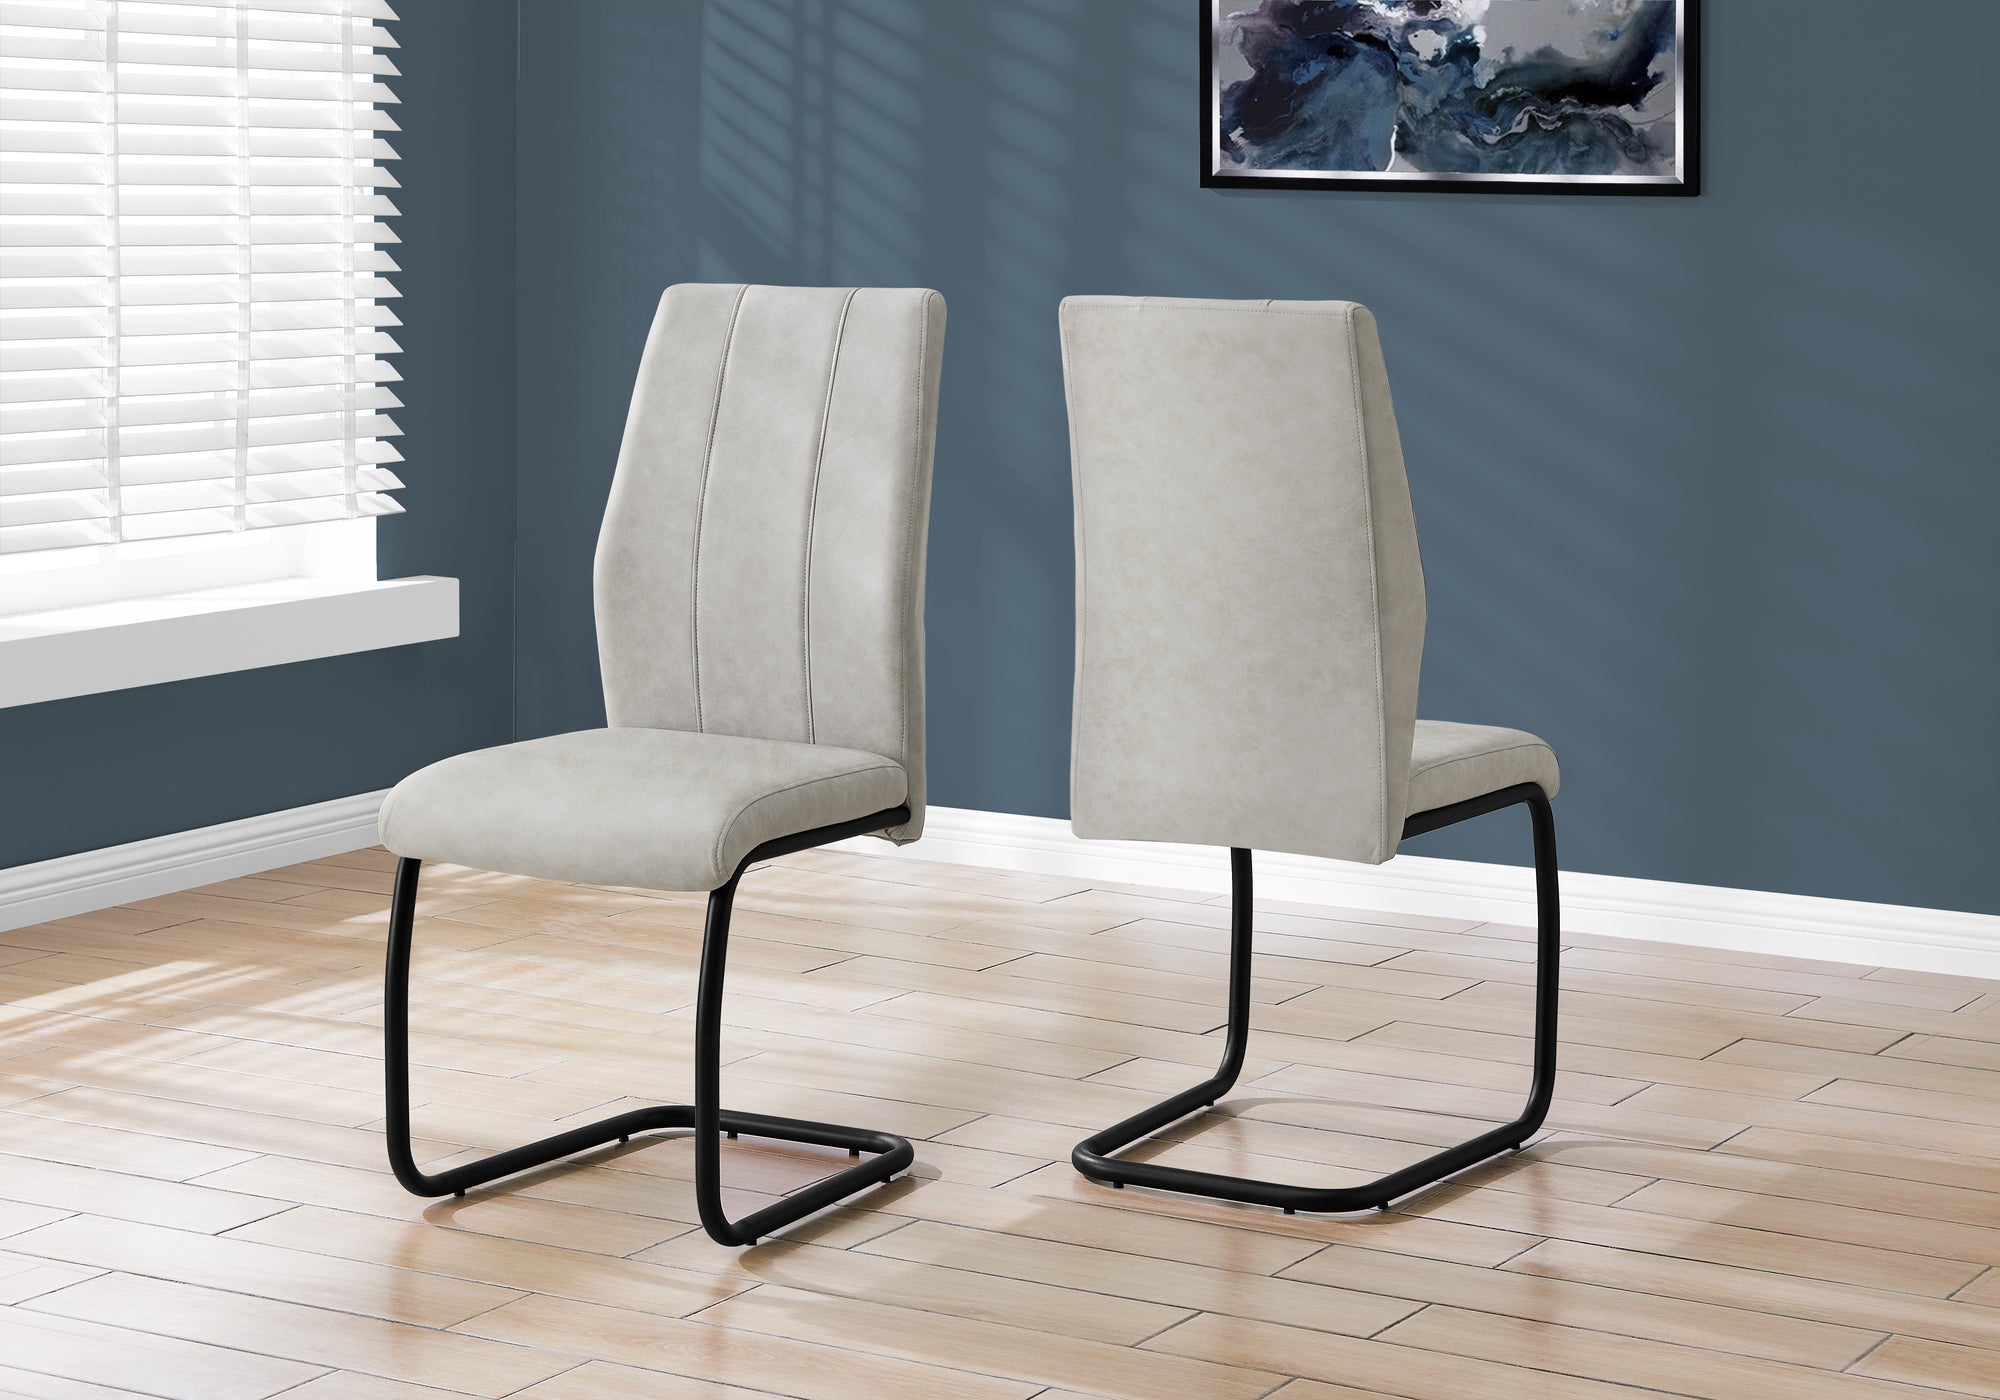 MN-561113    Dining Chair, Set Of 2, Side, Pu Leather-Look, Upholstered, Metal Legs, Kitchen, Dining Room, Velvet, Metal Legs, Grey, Black, Contemporary, Modern